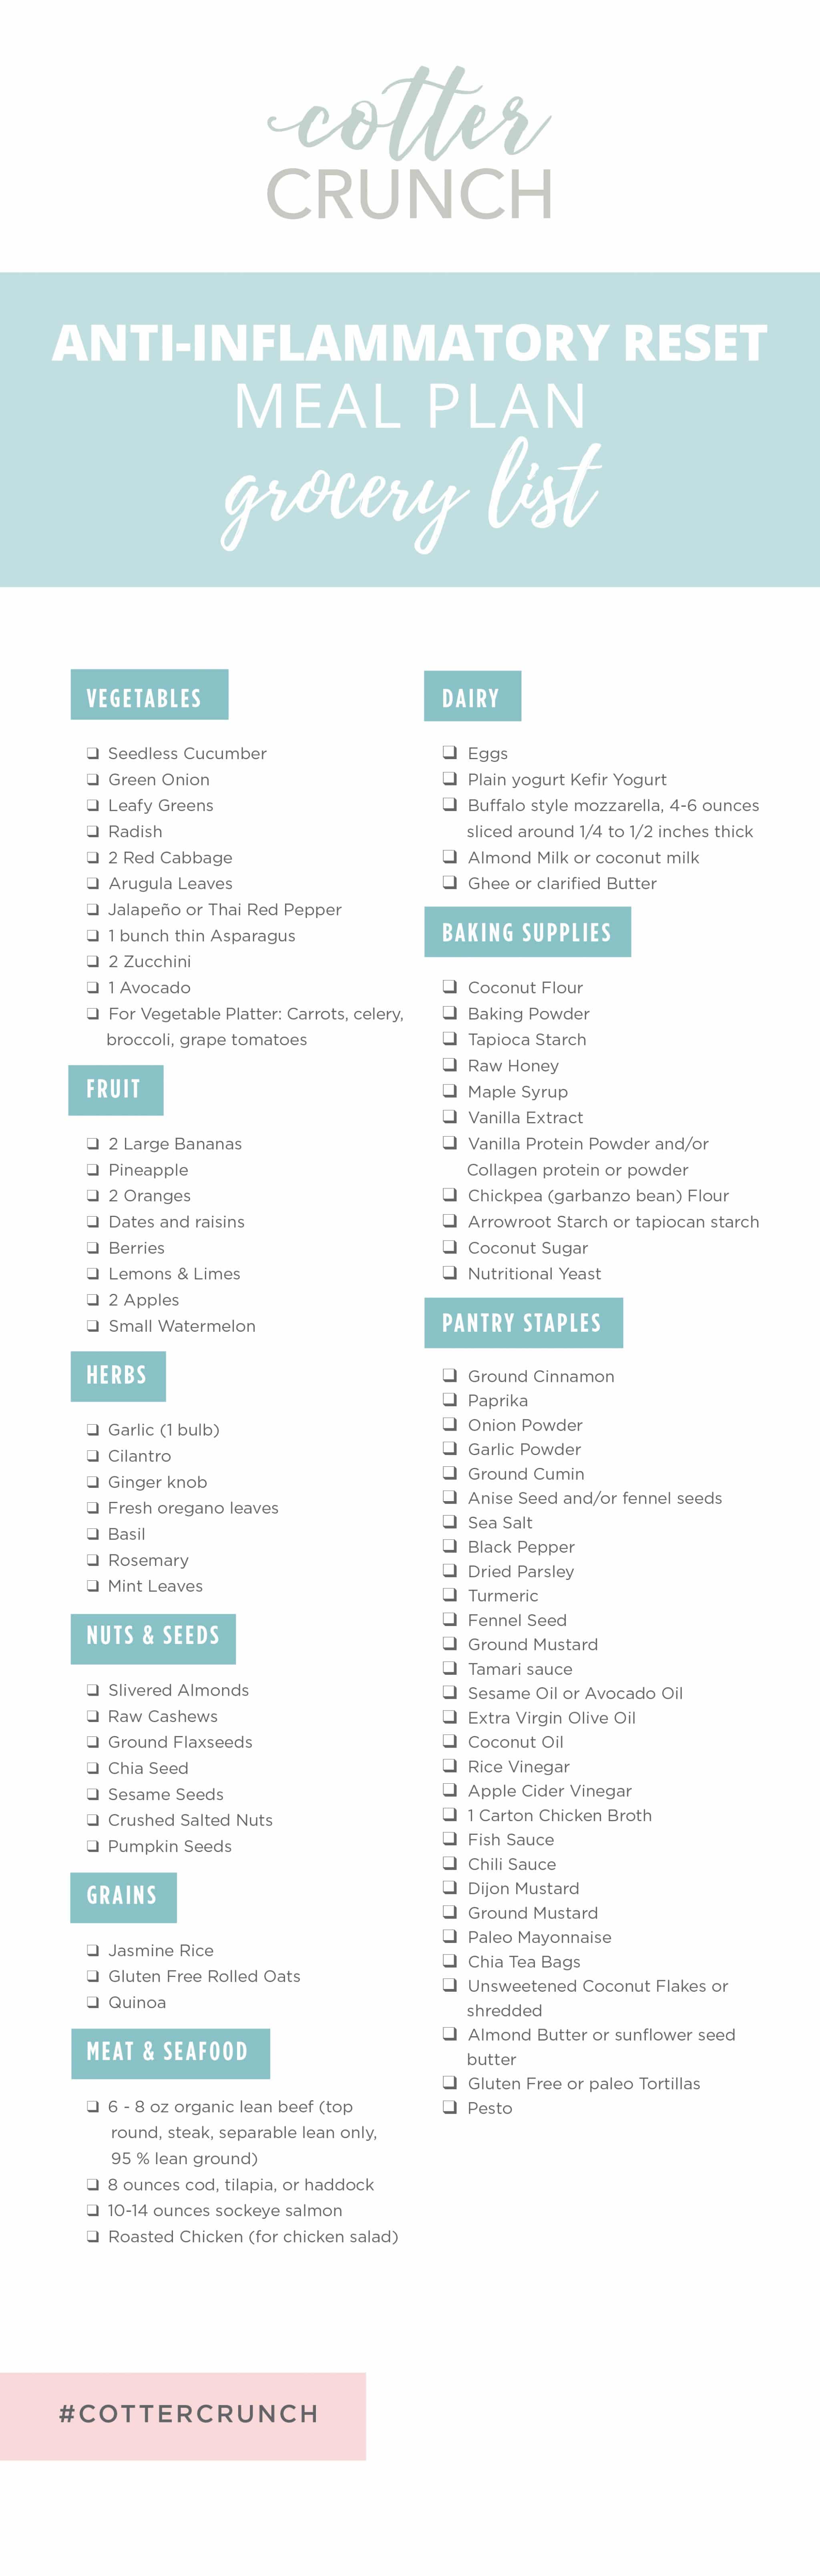 anti-inflammatory meal plan grocery list